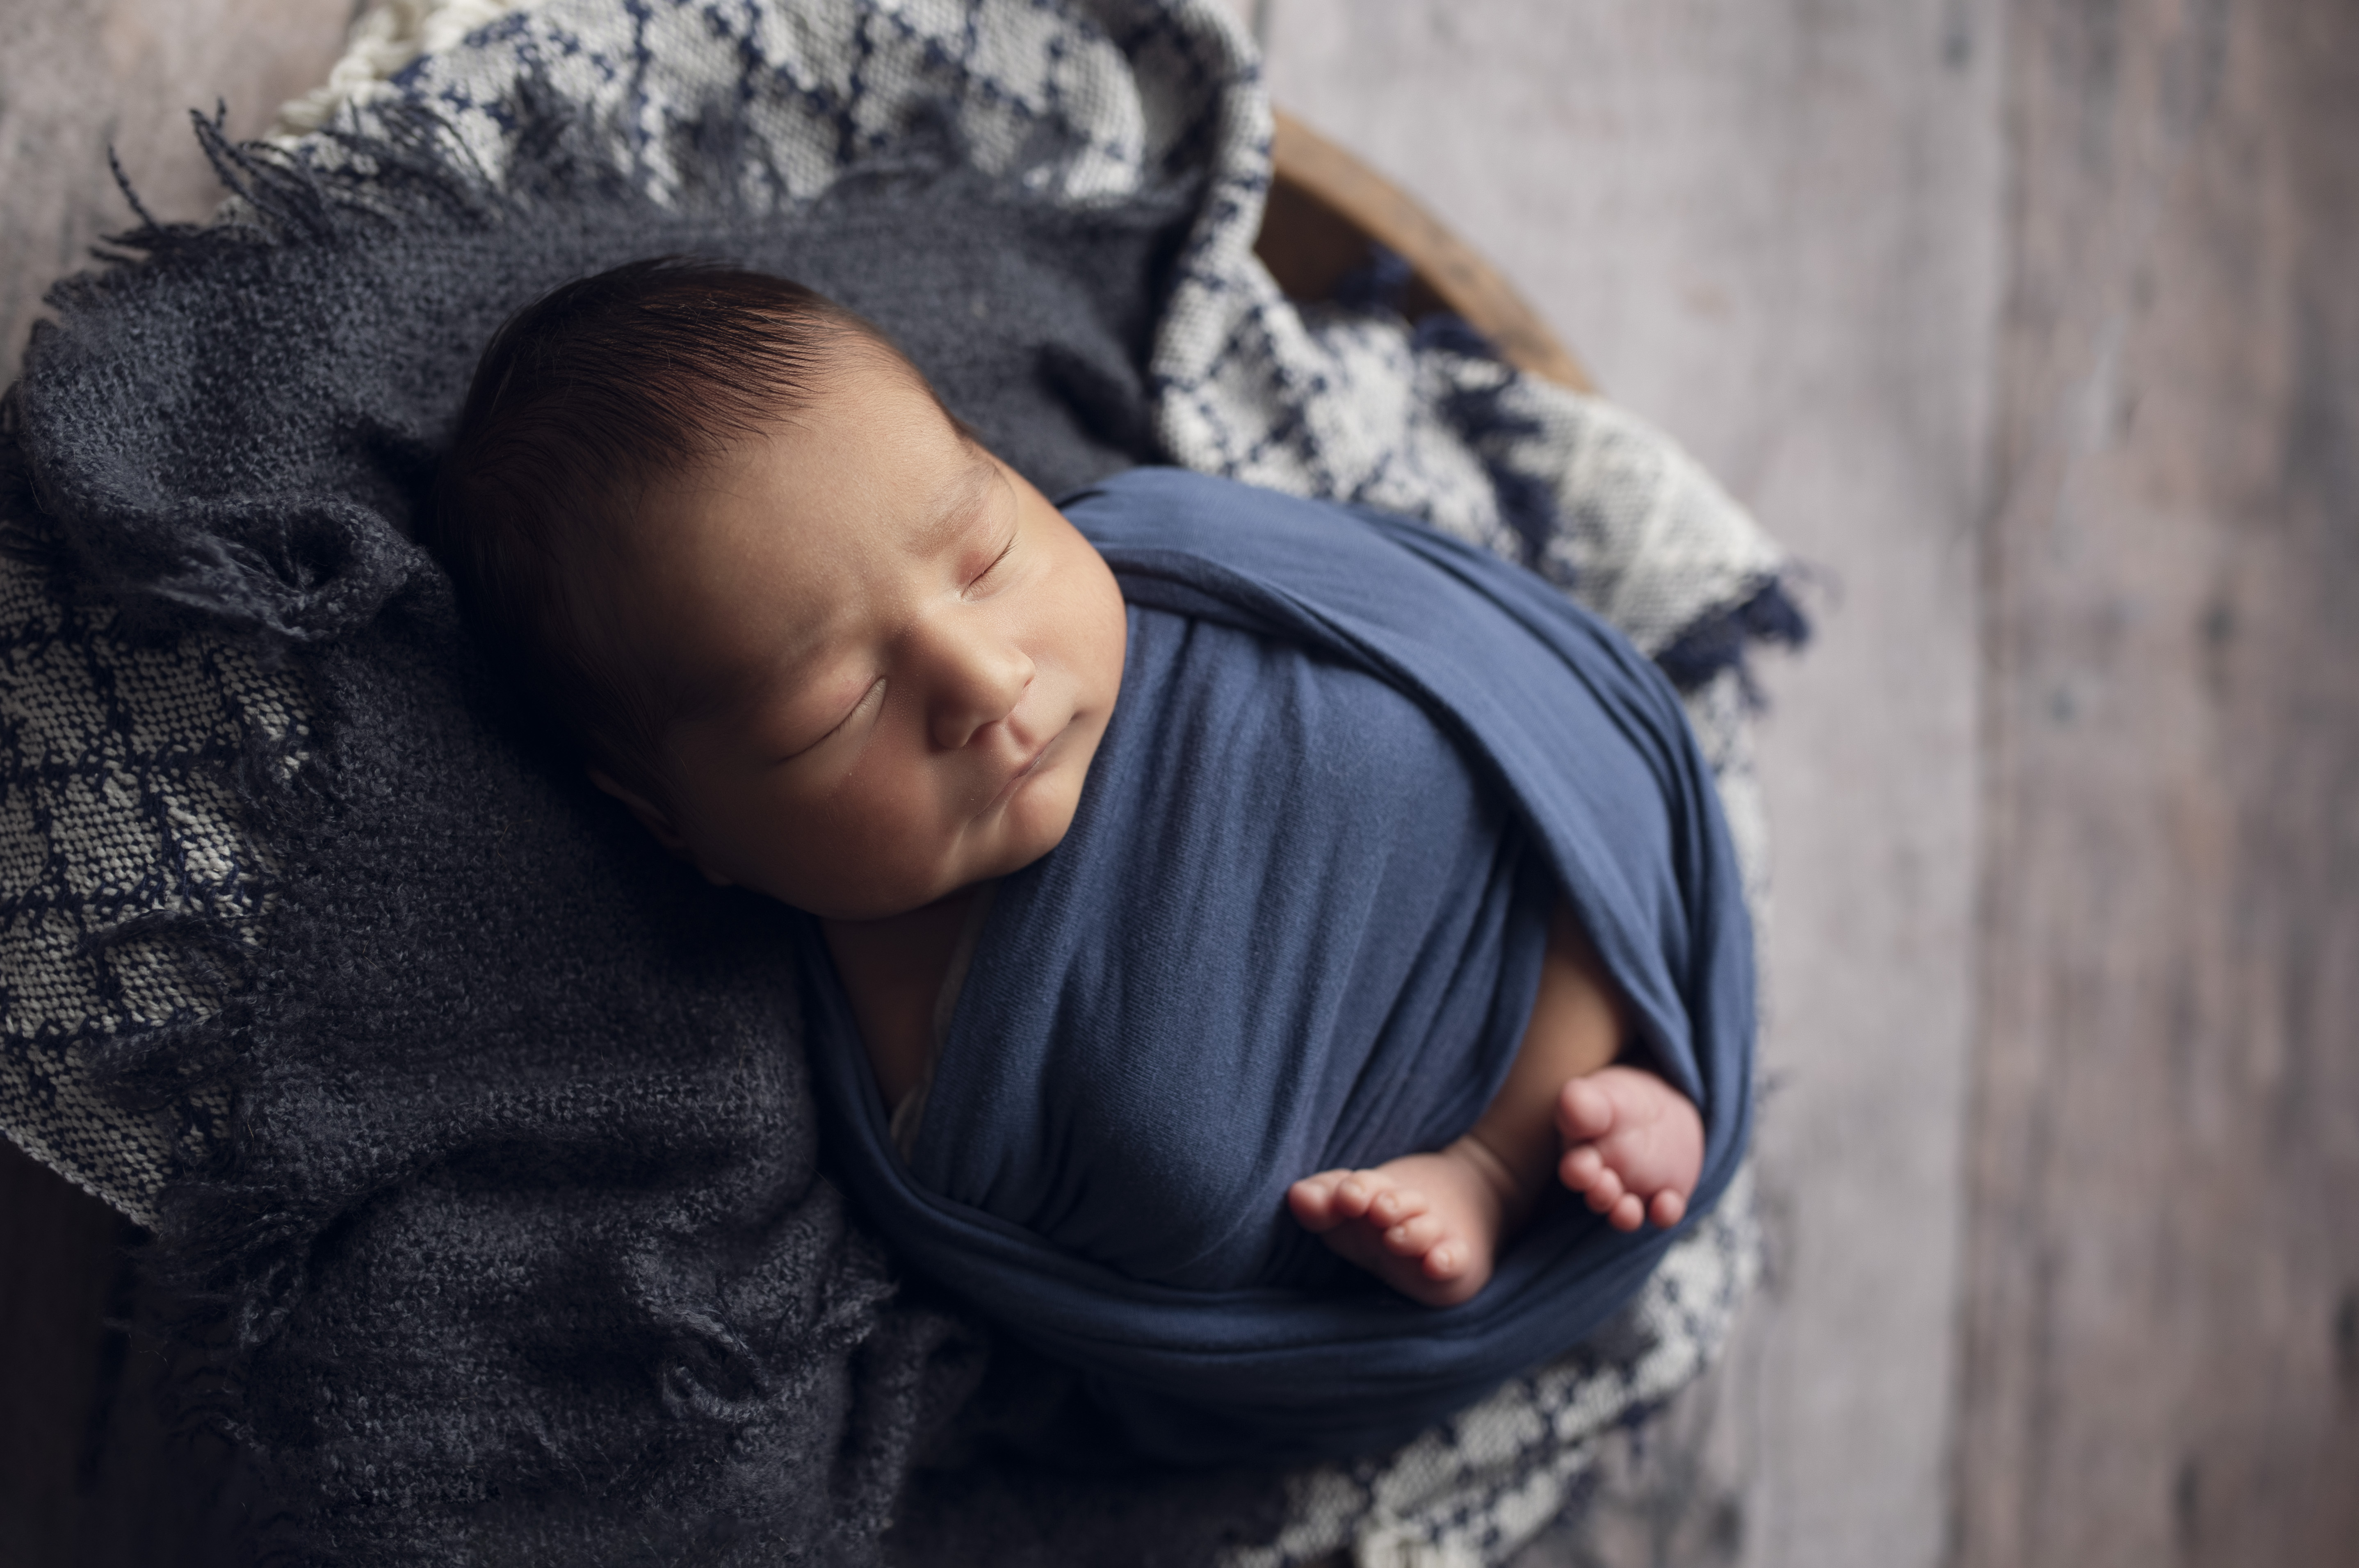 Grand rapids newborn photographer baby sleeping in bowl with blue blanket